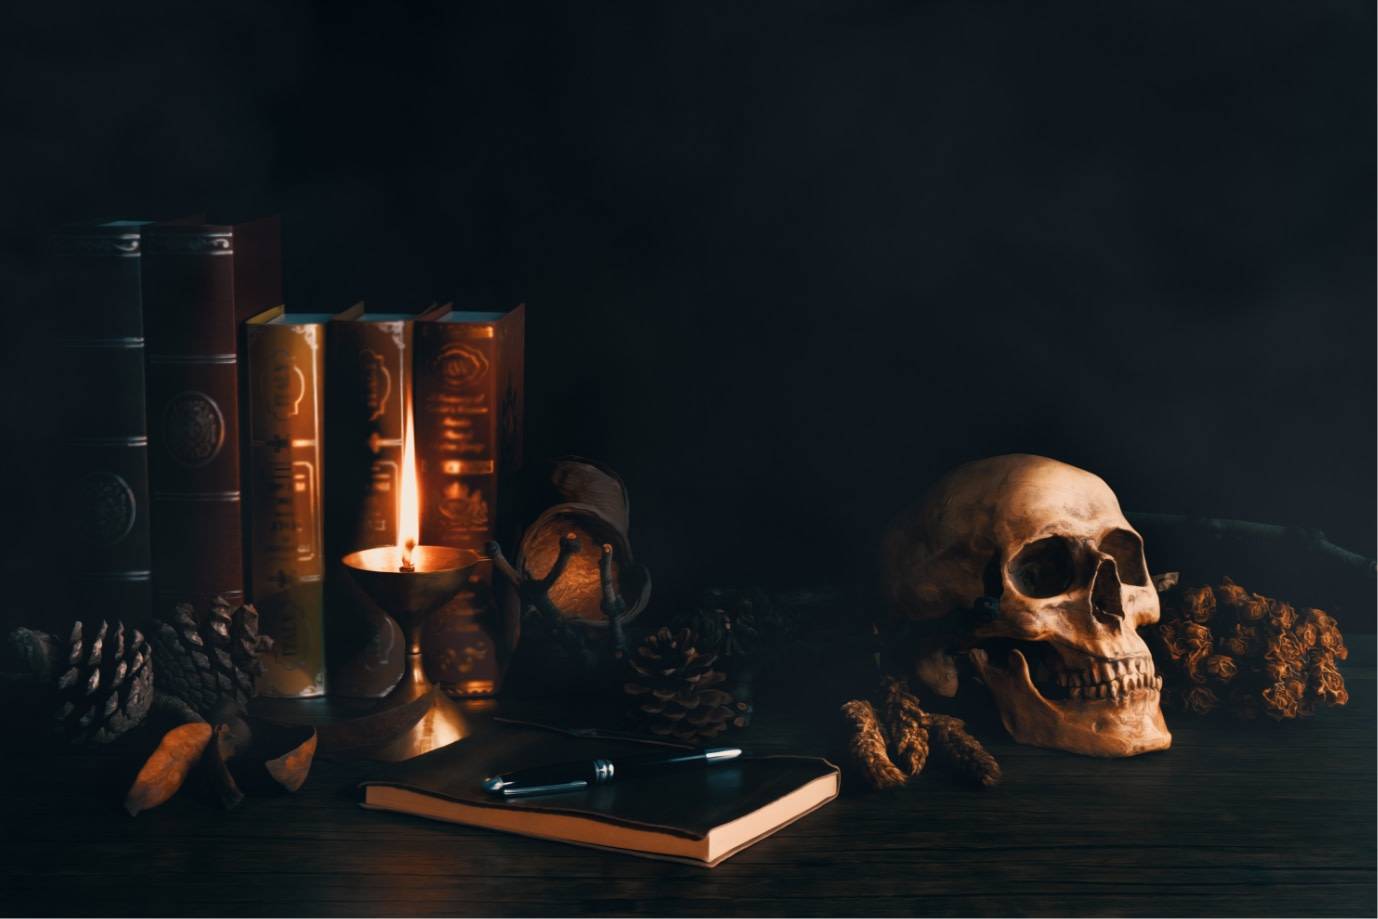 An eerie photo of old books, pinecones, a candle and a skull